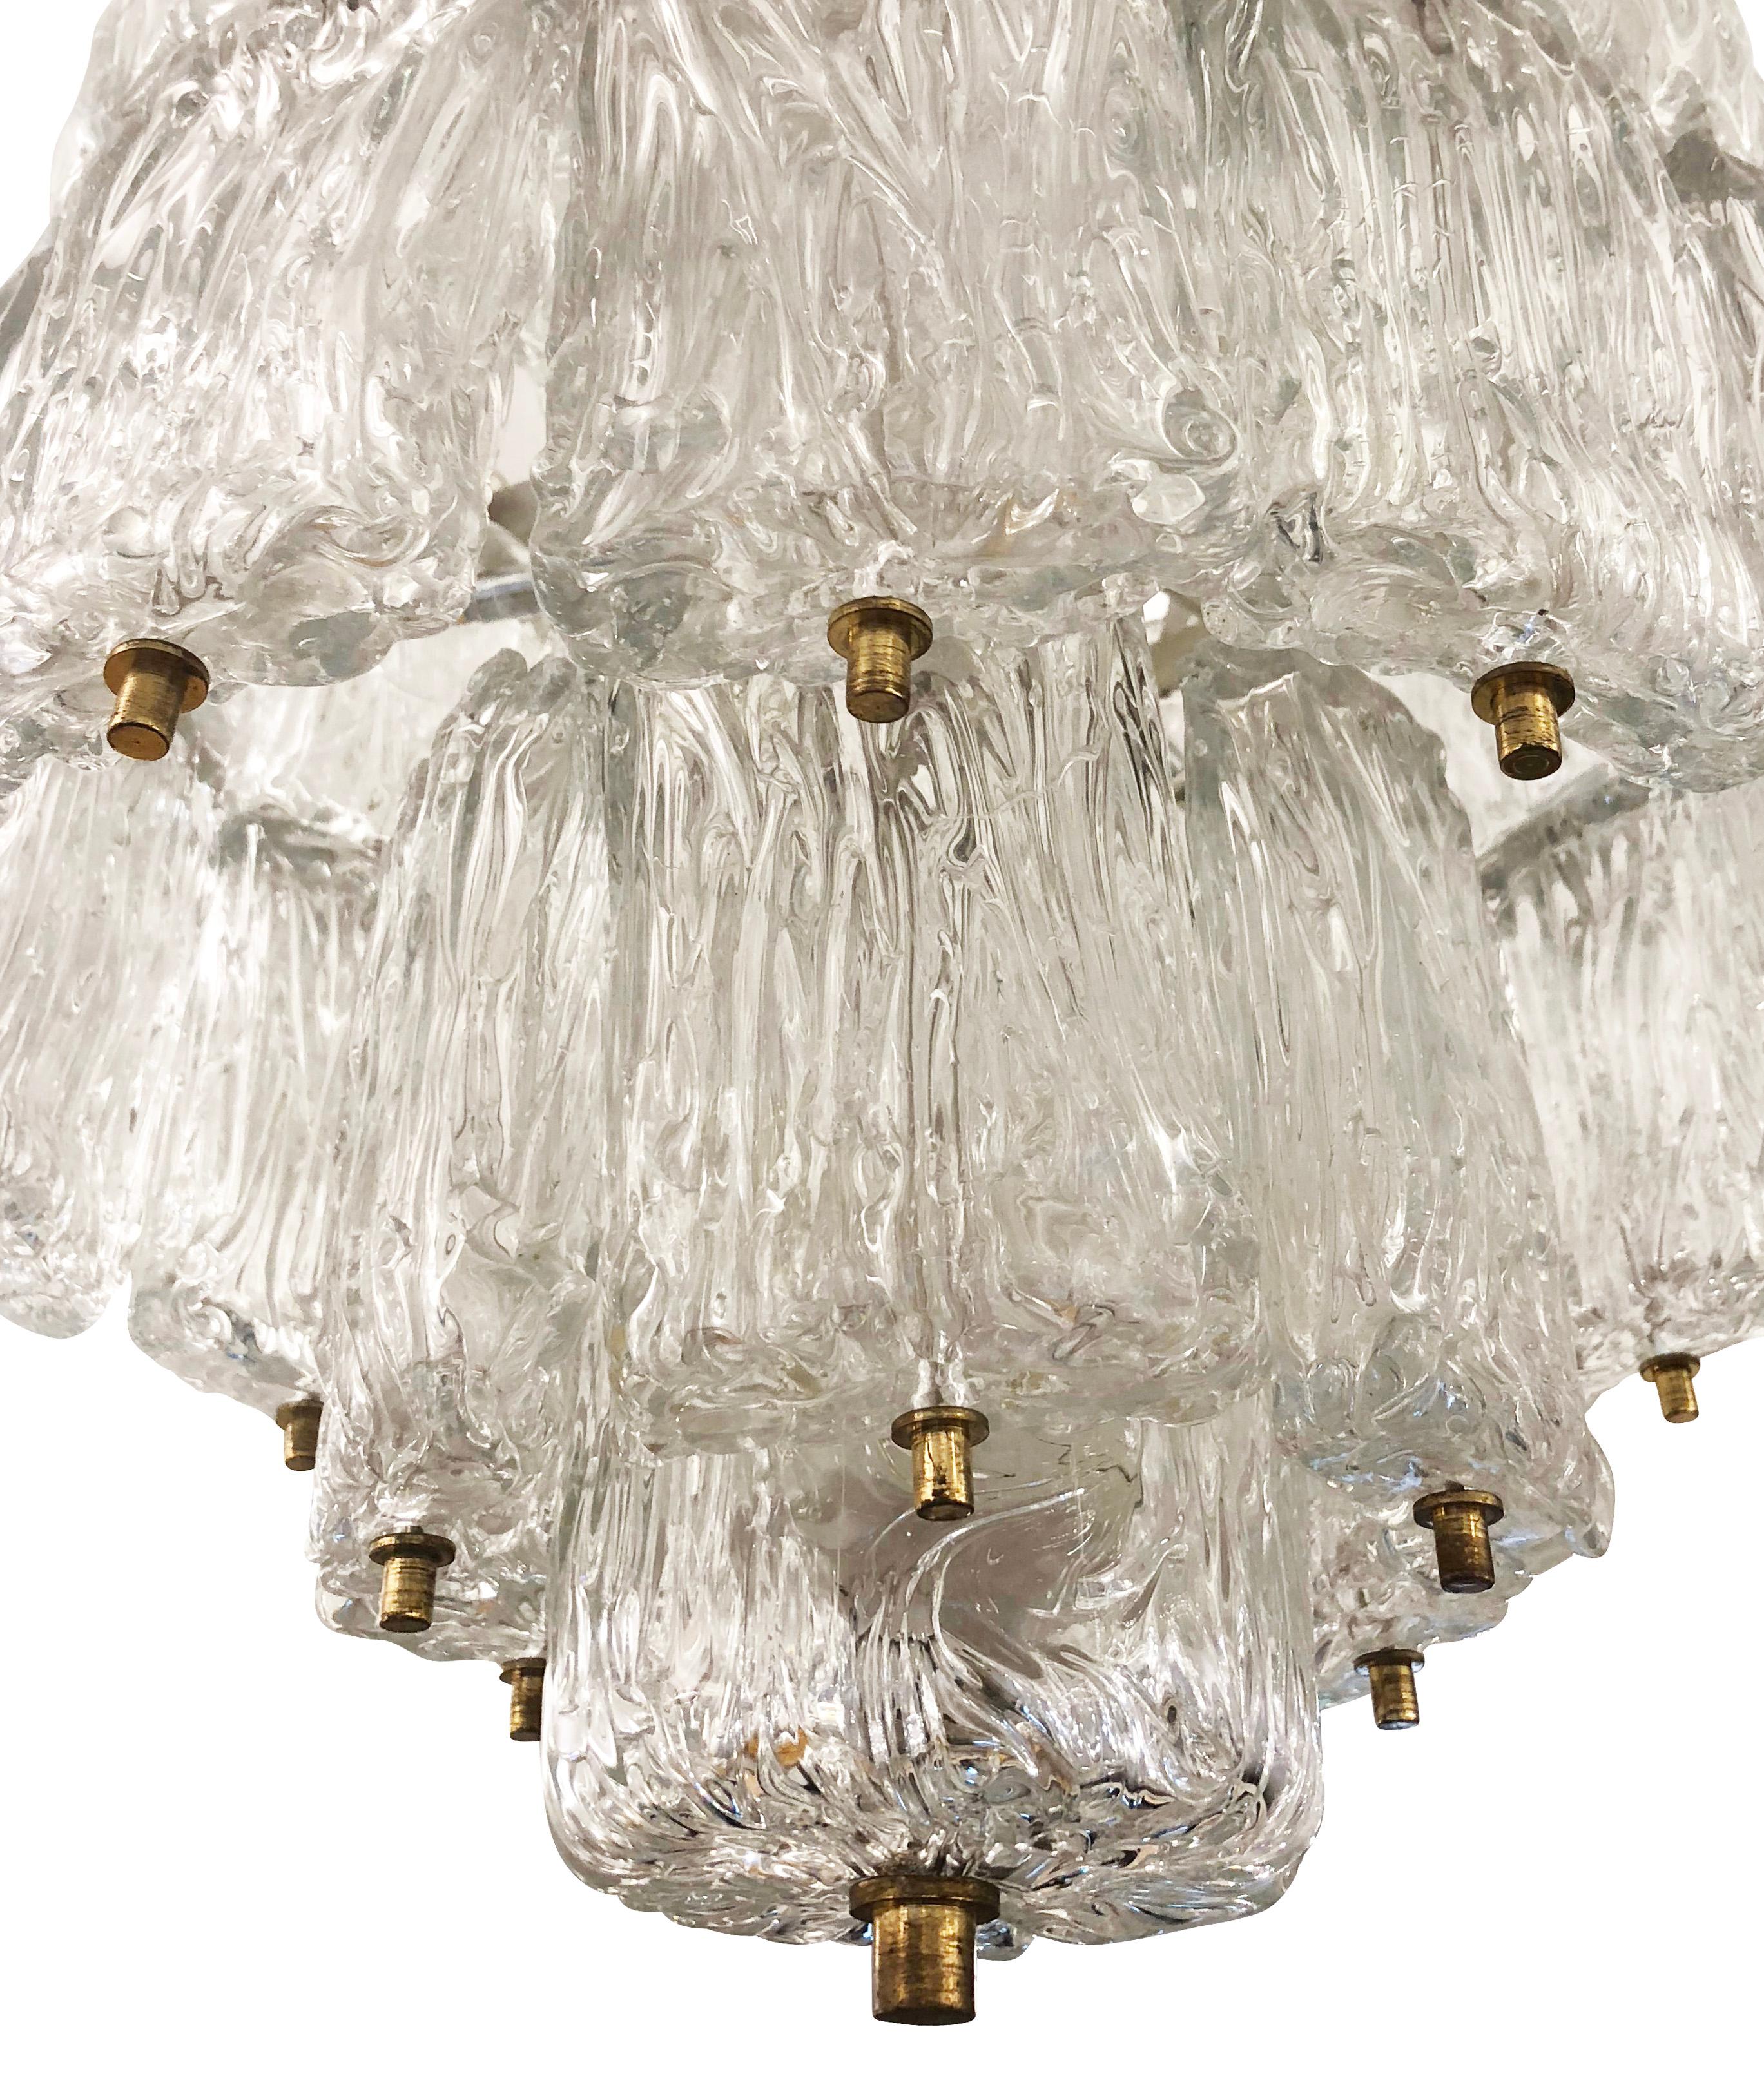 Mid-20th Century Textured Glass Barovier and Toso Chandelier, Italy, 1950s